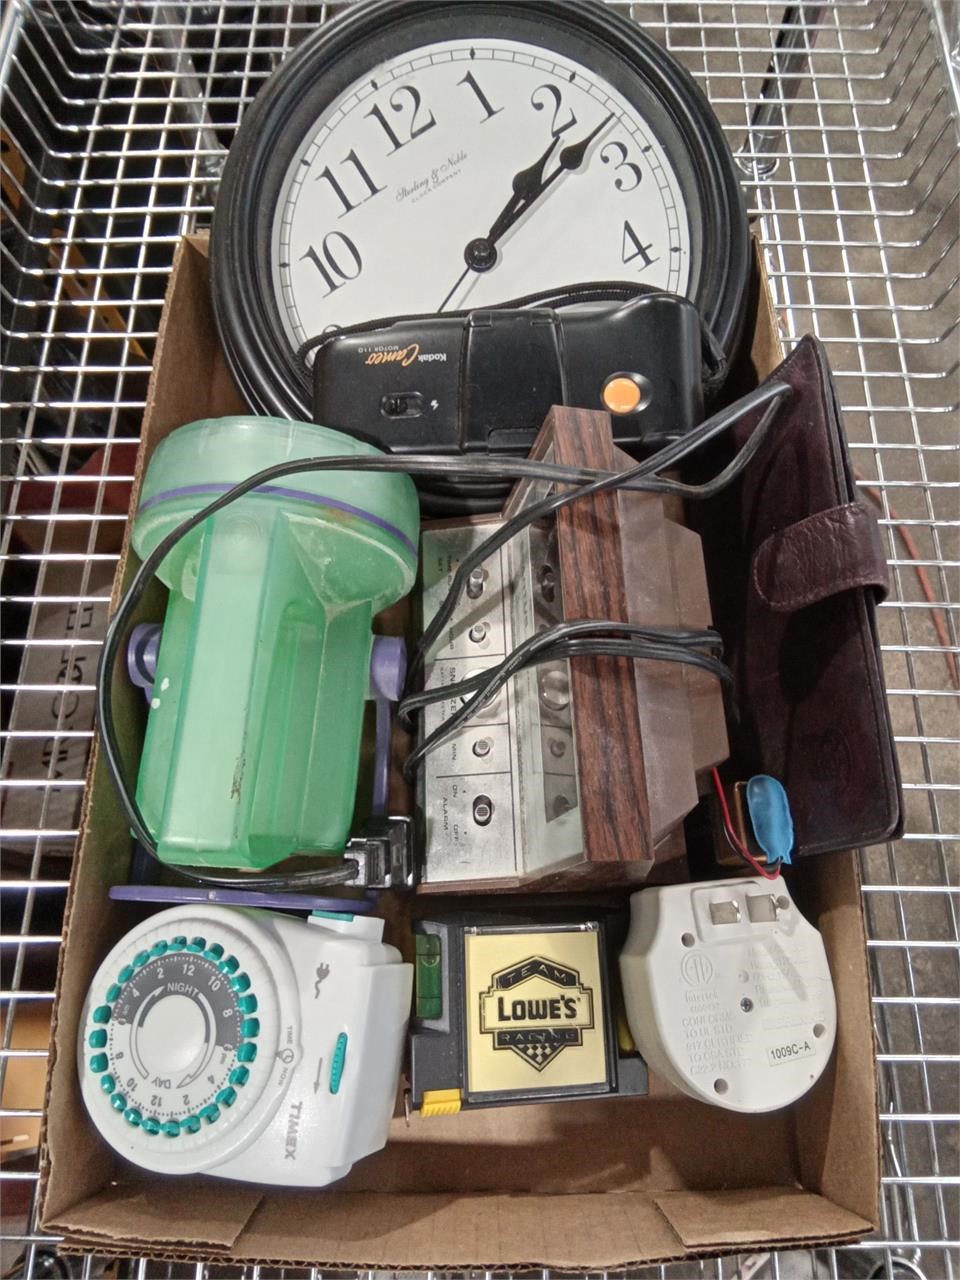 Mississippi Pickers June #3 Consignment Auction